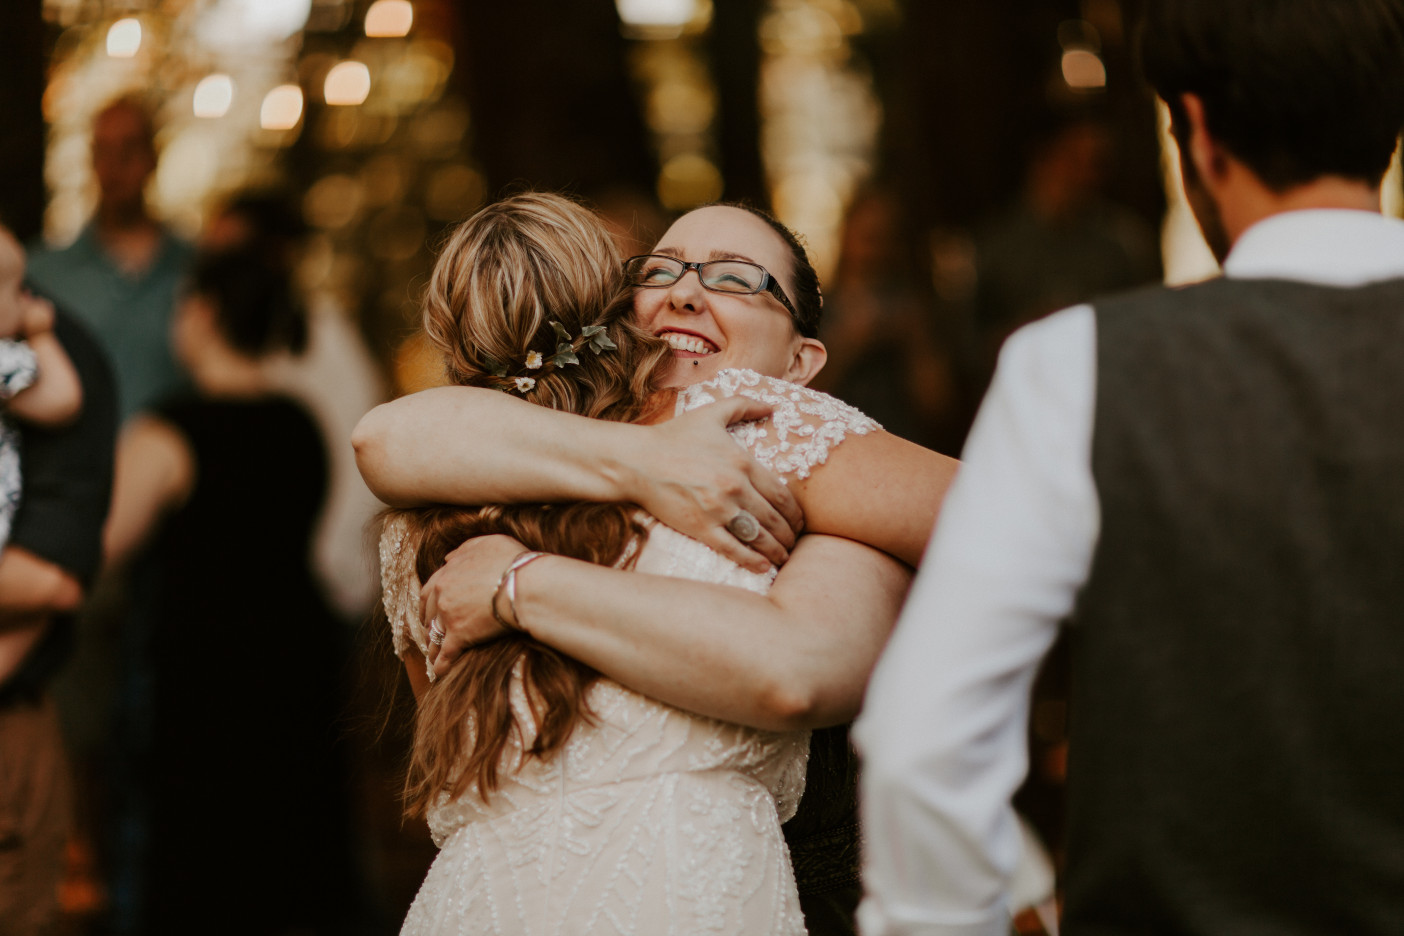 Hannah hugs a guest in Corvallis, Oregon. Intimate wedding photography in Corvallis Oregon by Sienna Plus Josh.